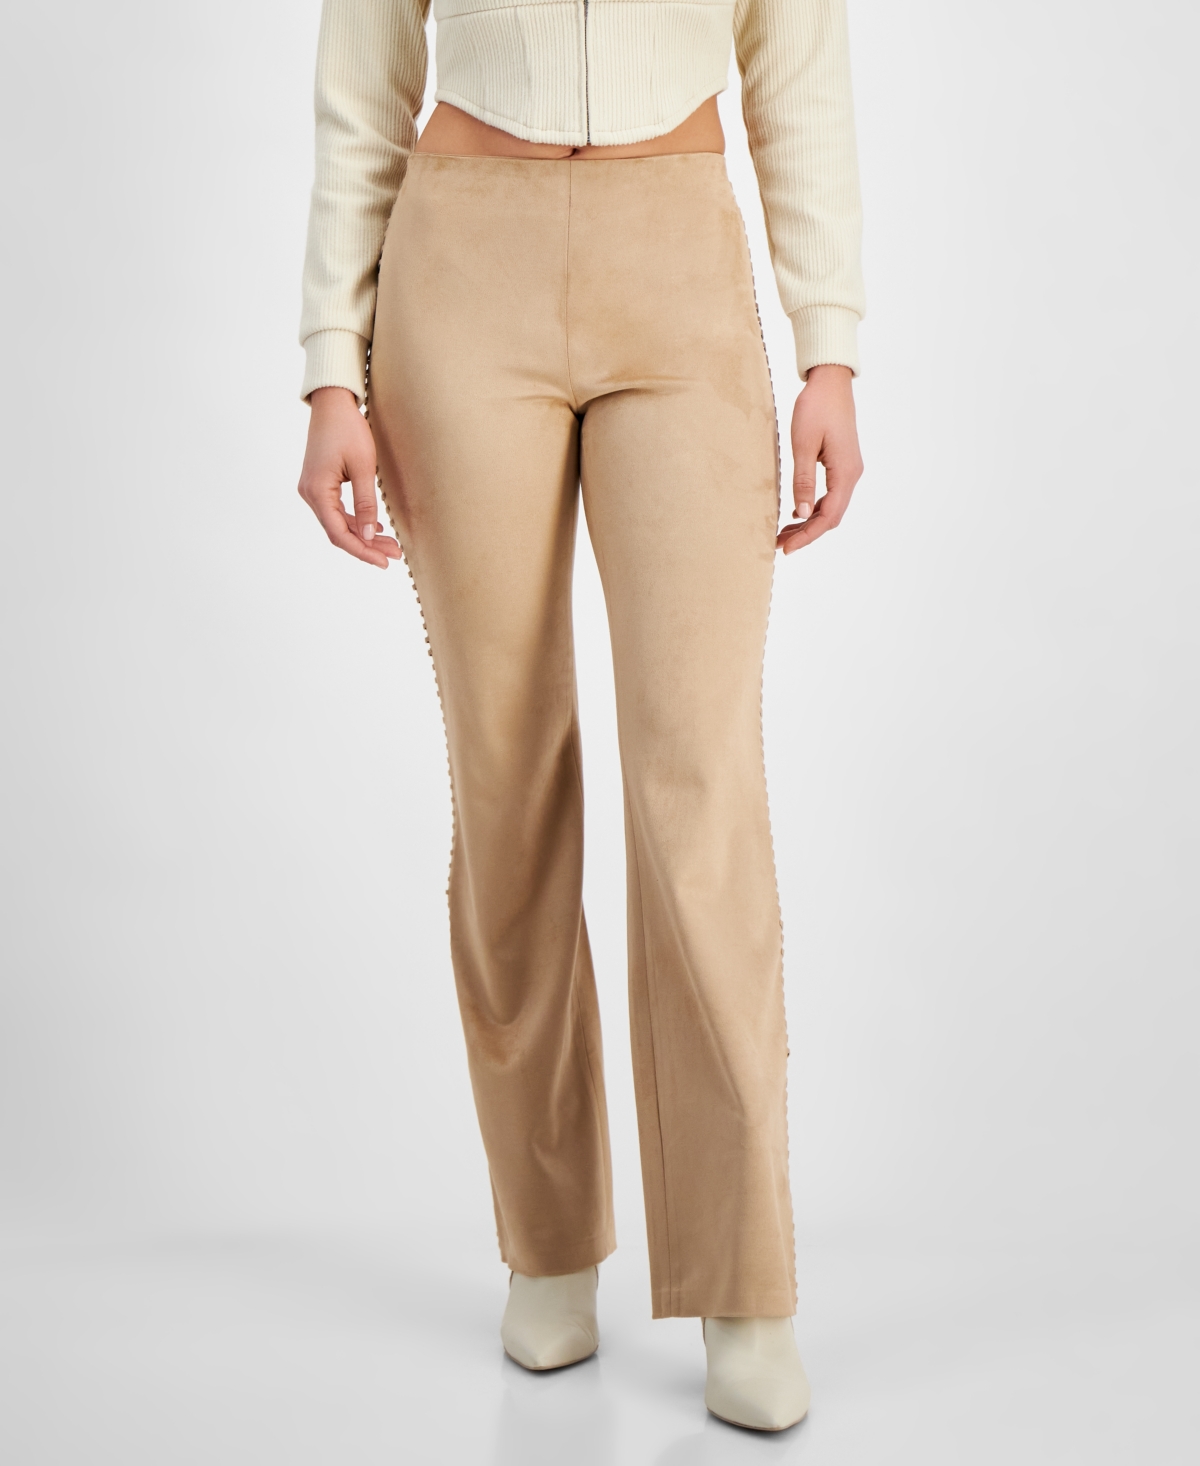 Women's Ornella Faux-Suede Whipstitched Pants - Wet Sand